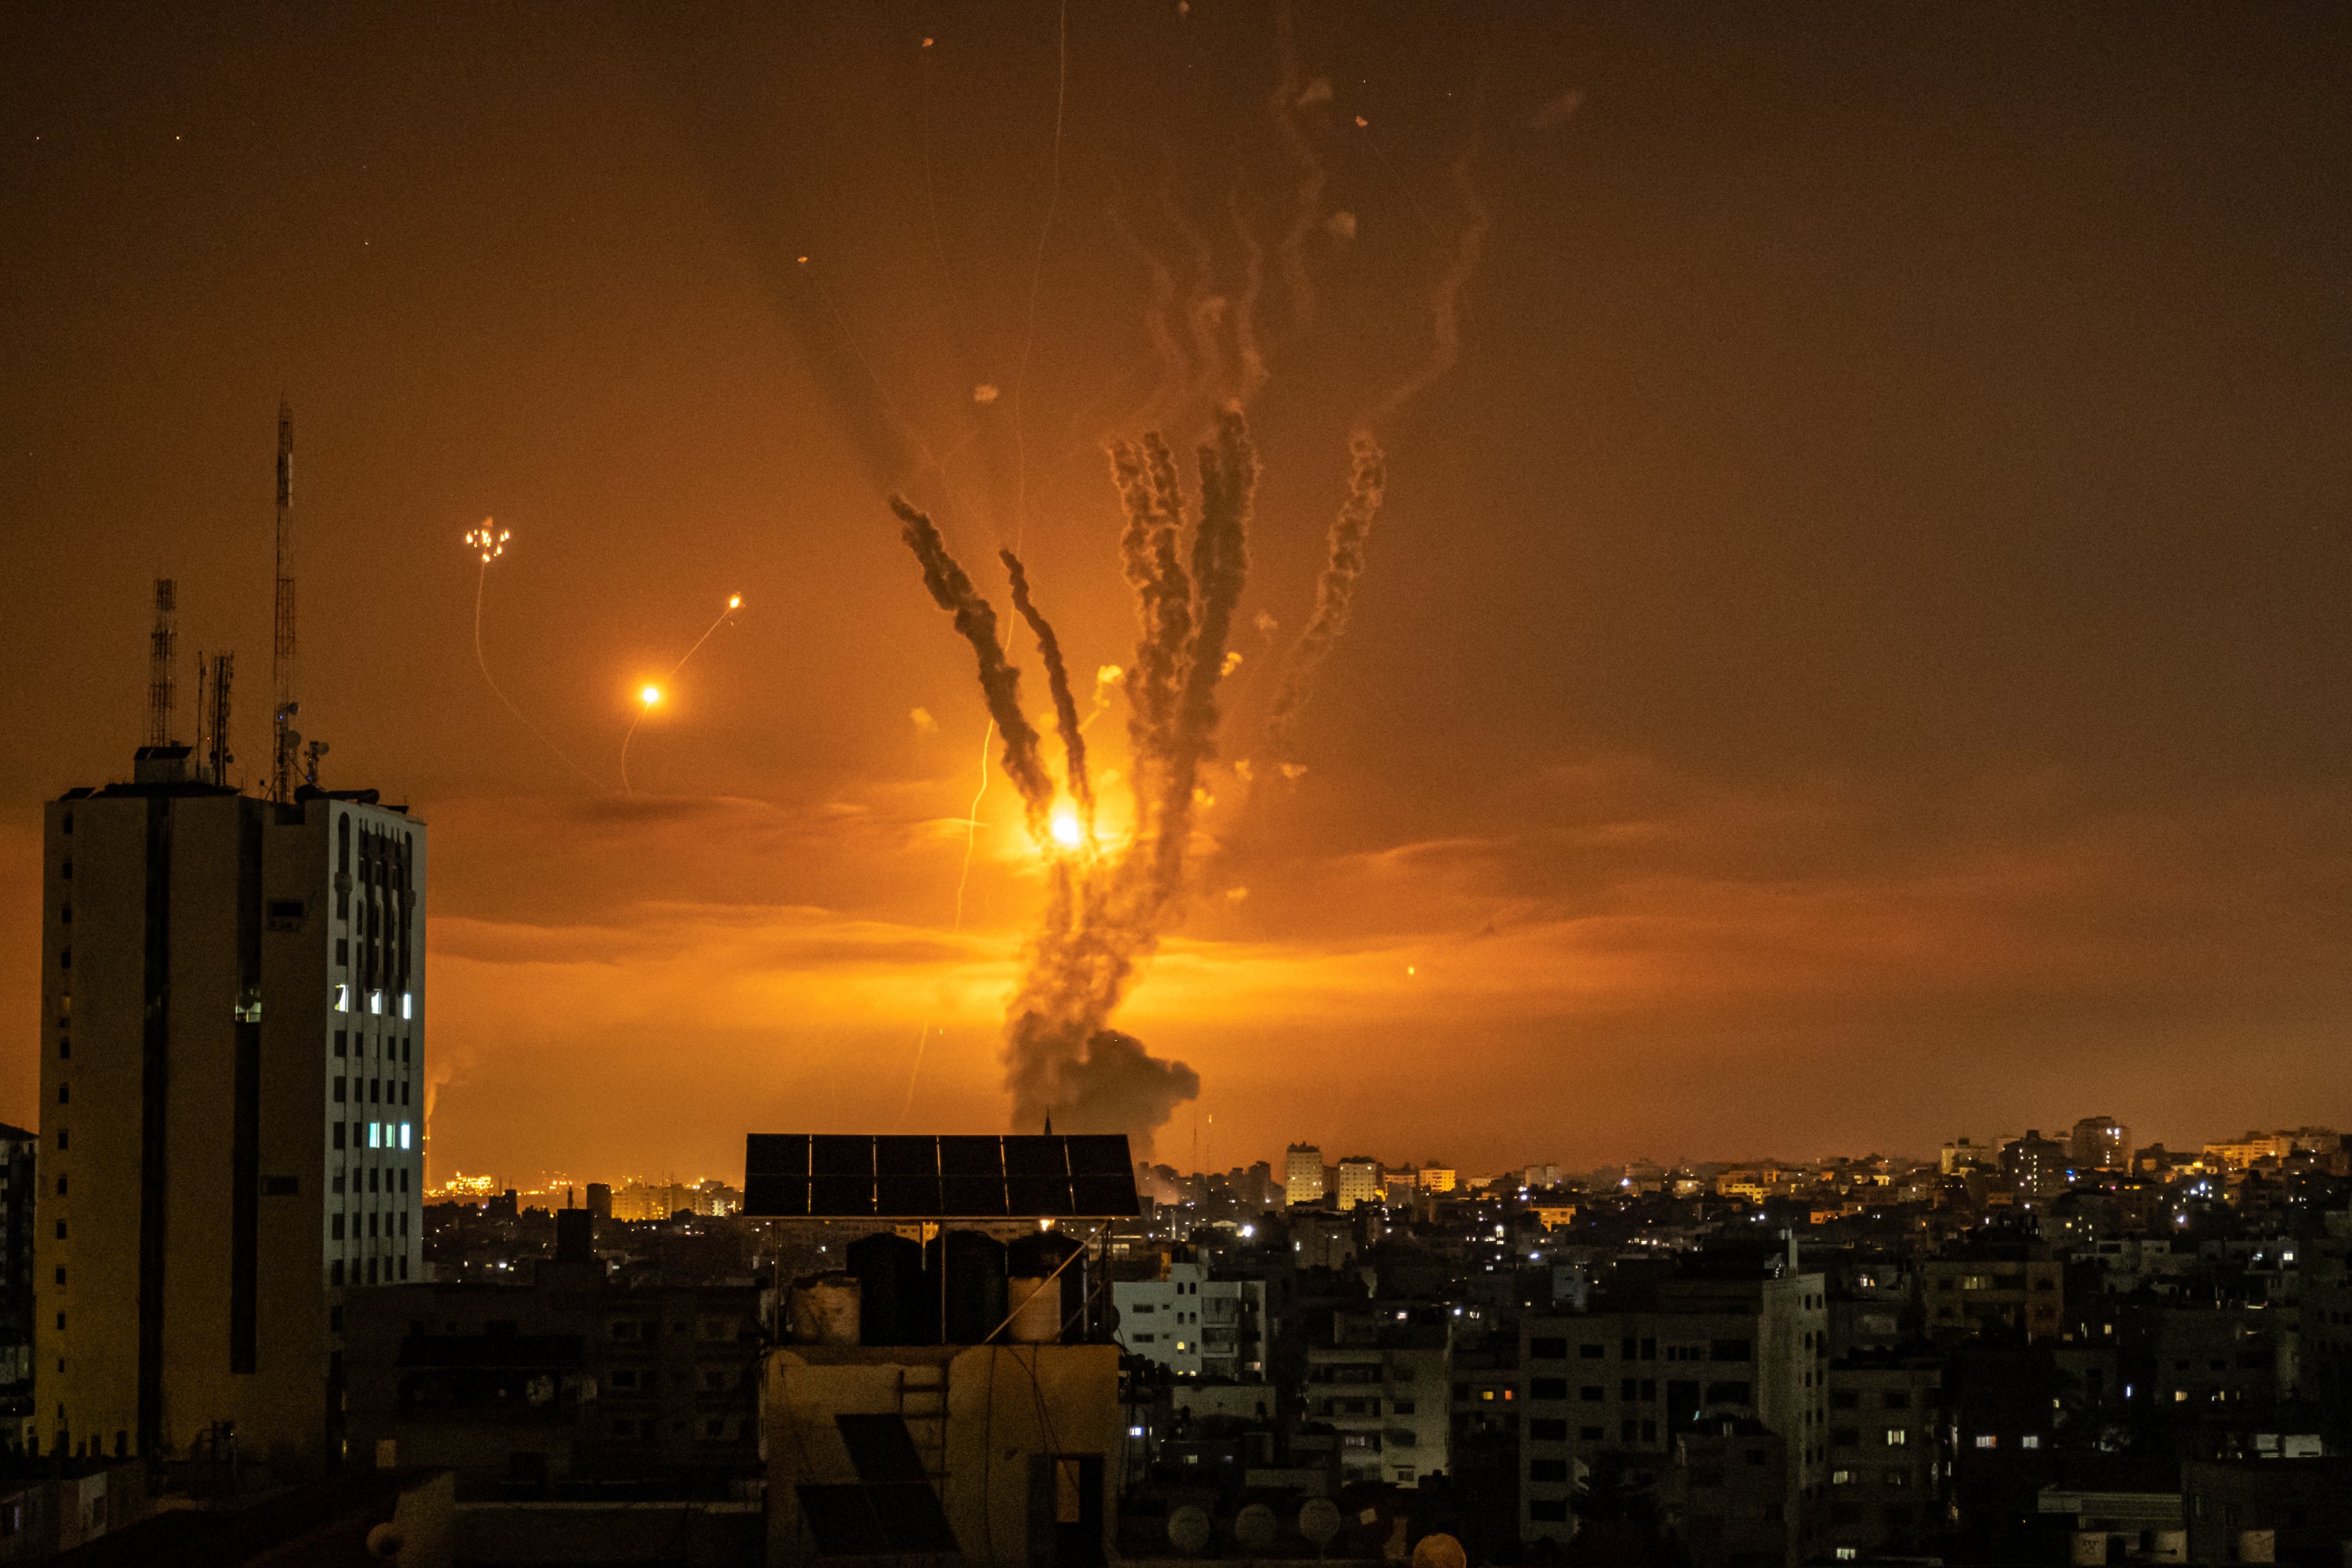 Rockets launched towards Israel from the northern Gaza Strip and a response from the Israeli missile defense system known as the Iron Dome leave streaks through the sky over Gaza City